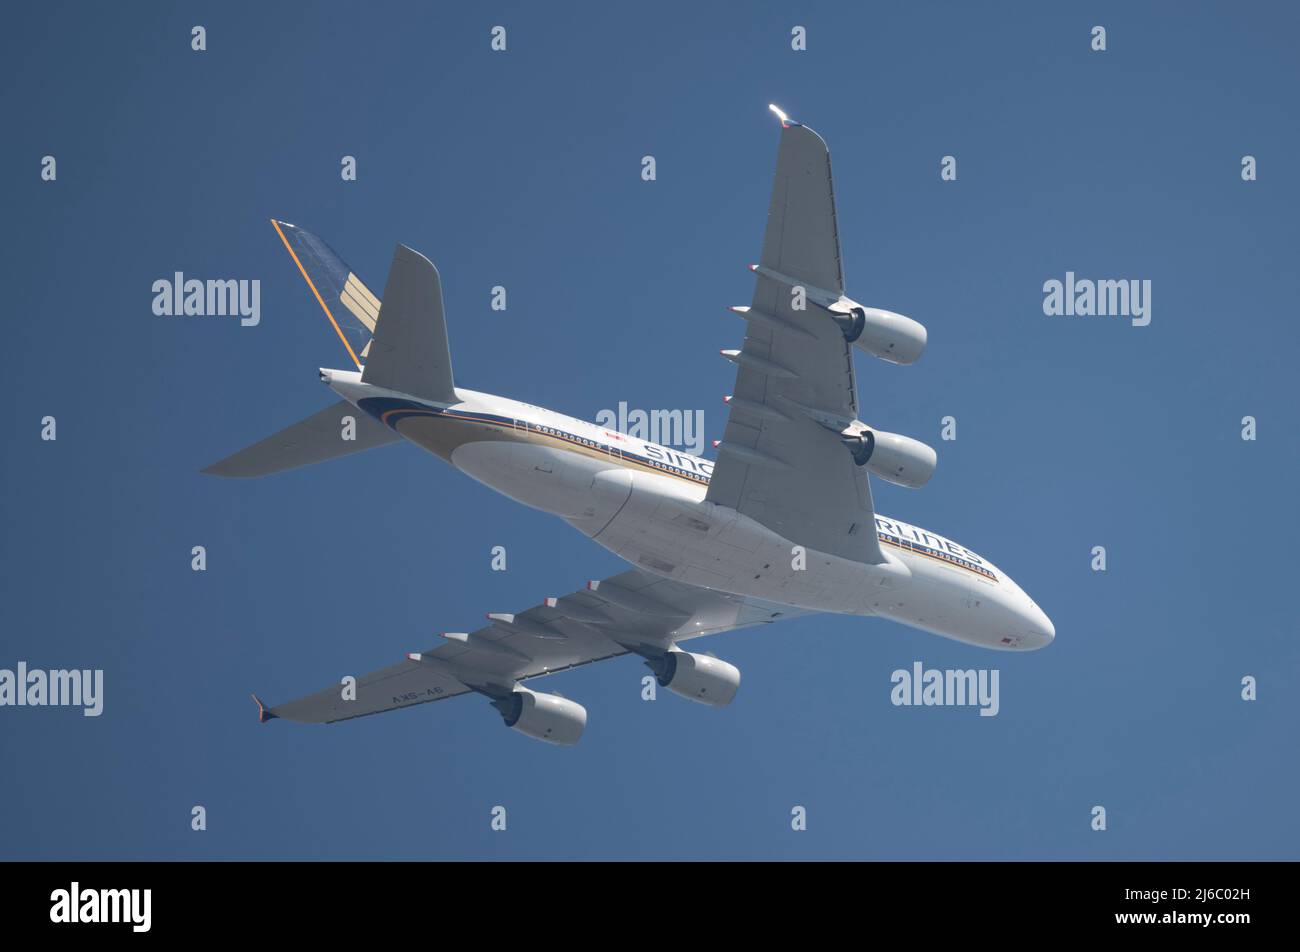 30 April 2022, London, UK. Singapore Airlines 9V-SKV, Airbus A380, leaving London Heathrow for Singapore in blue sky. Credit: Malcolm Park/Alamy Stock Photo